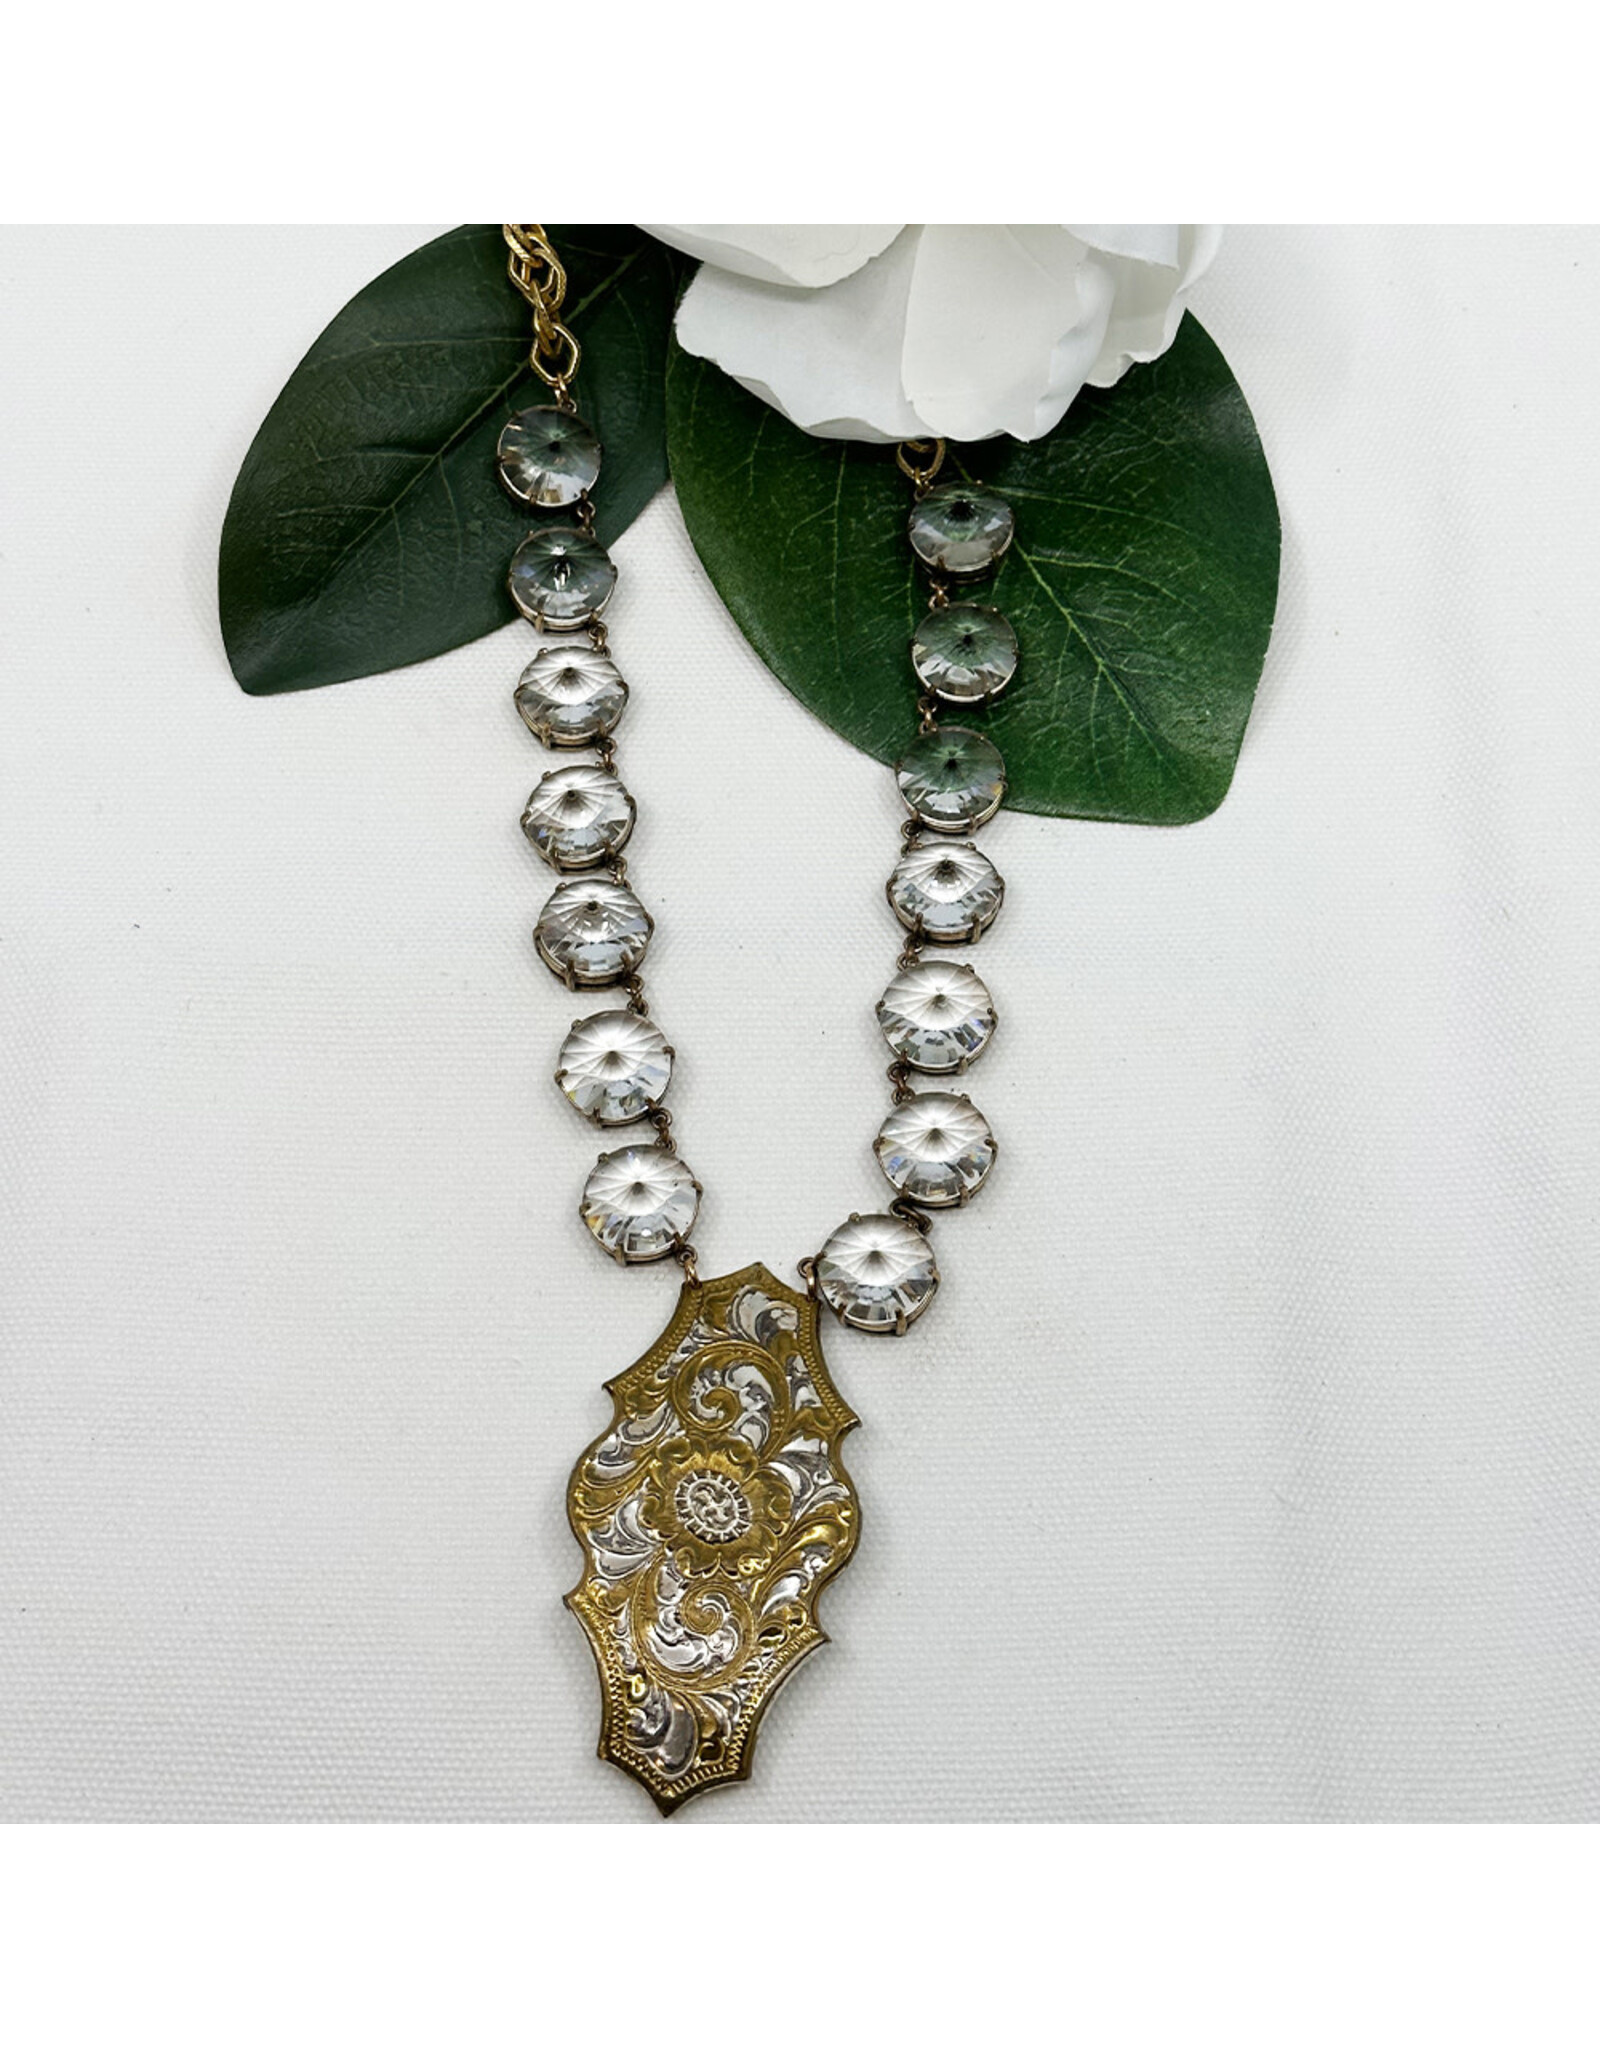 1960s Gold and Silver Buckle on 1970s Large Crystal Necklace